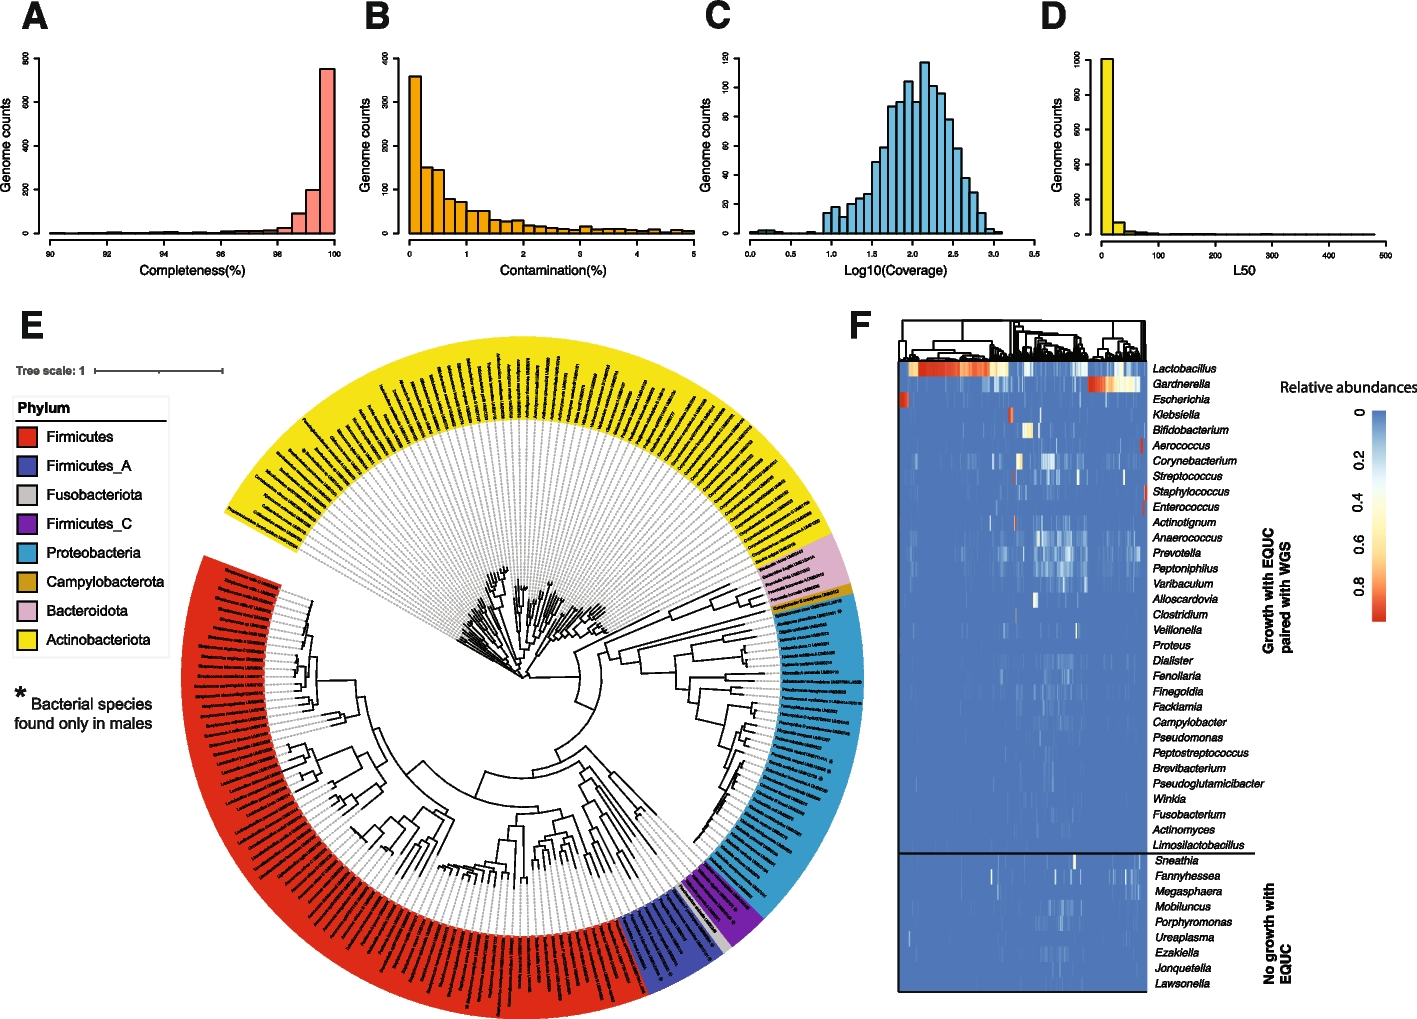 Cataloging the phylogenetic diversity of human bladder bacterial isolates